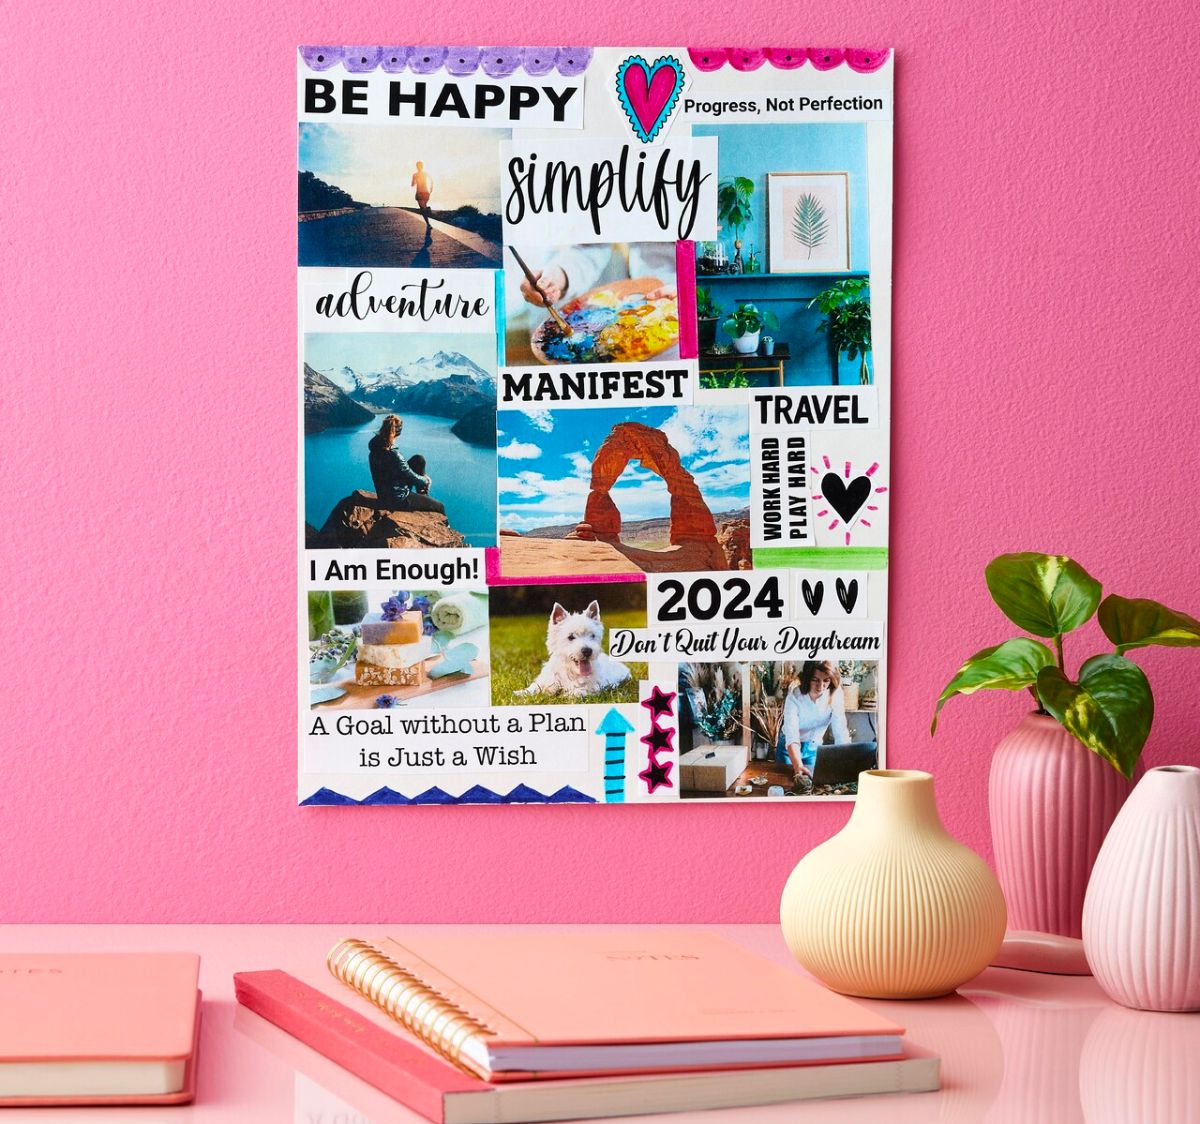 New Year's Vision Board from michaels kids event